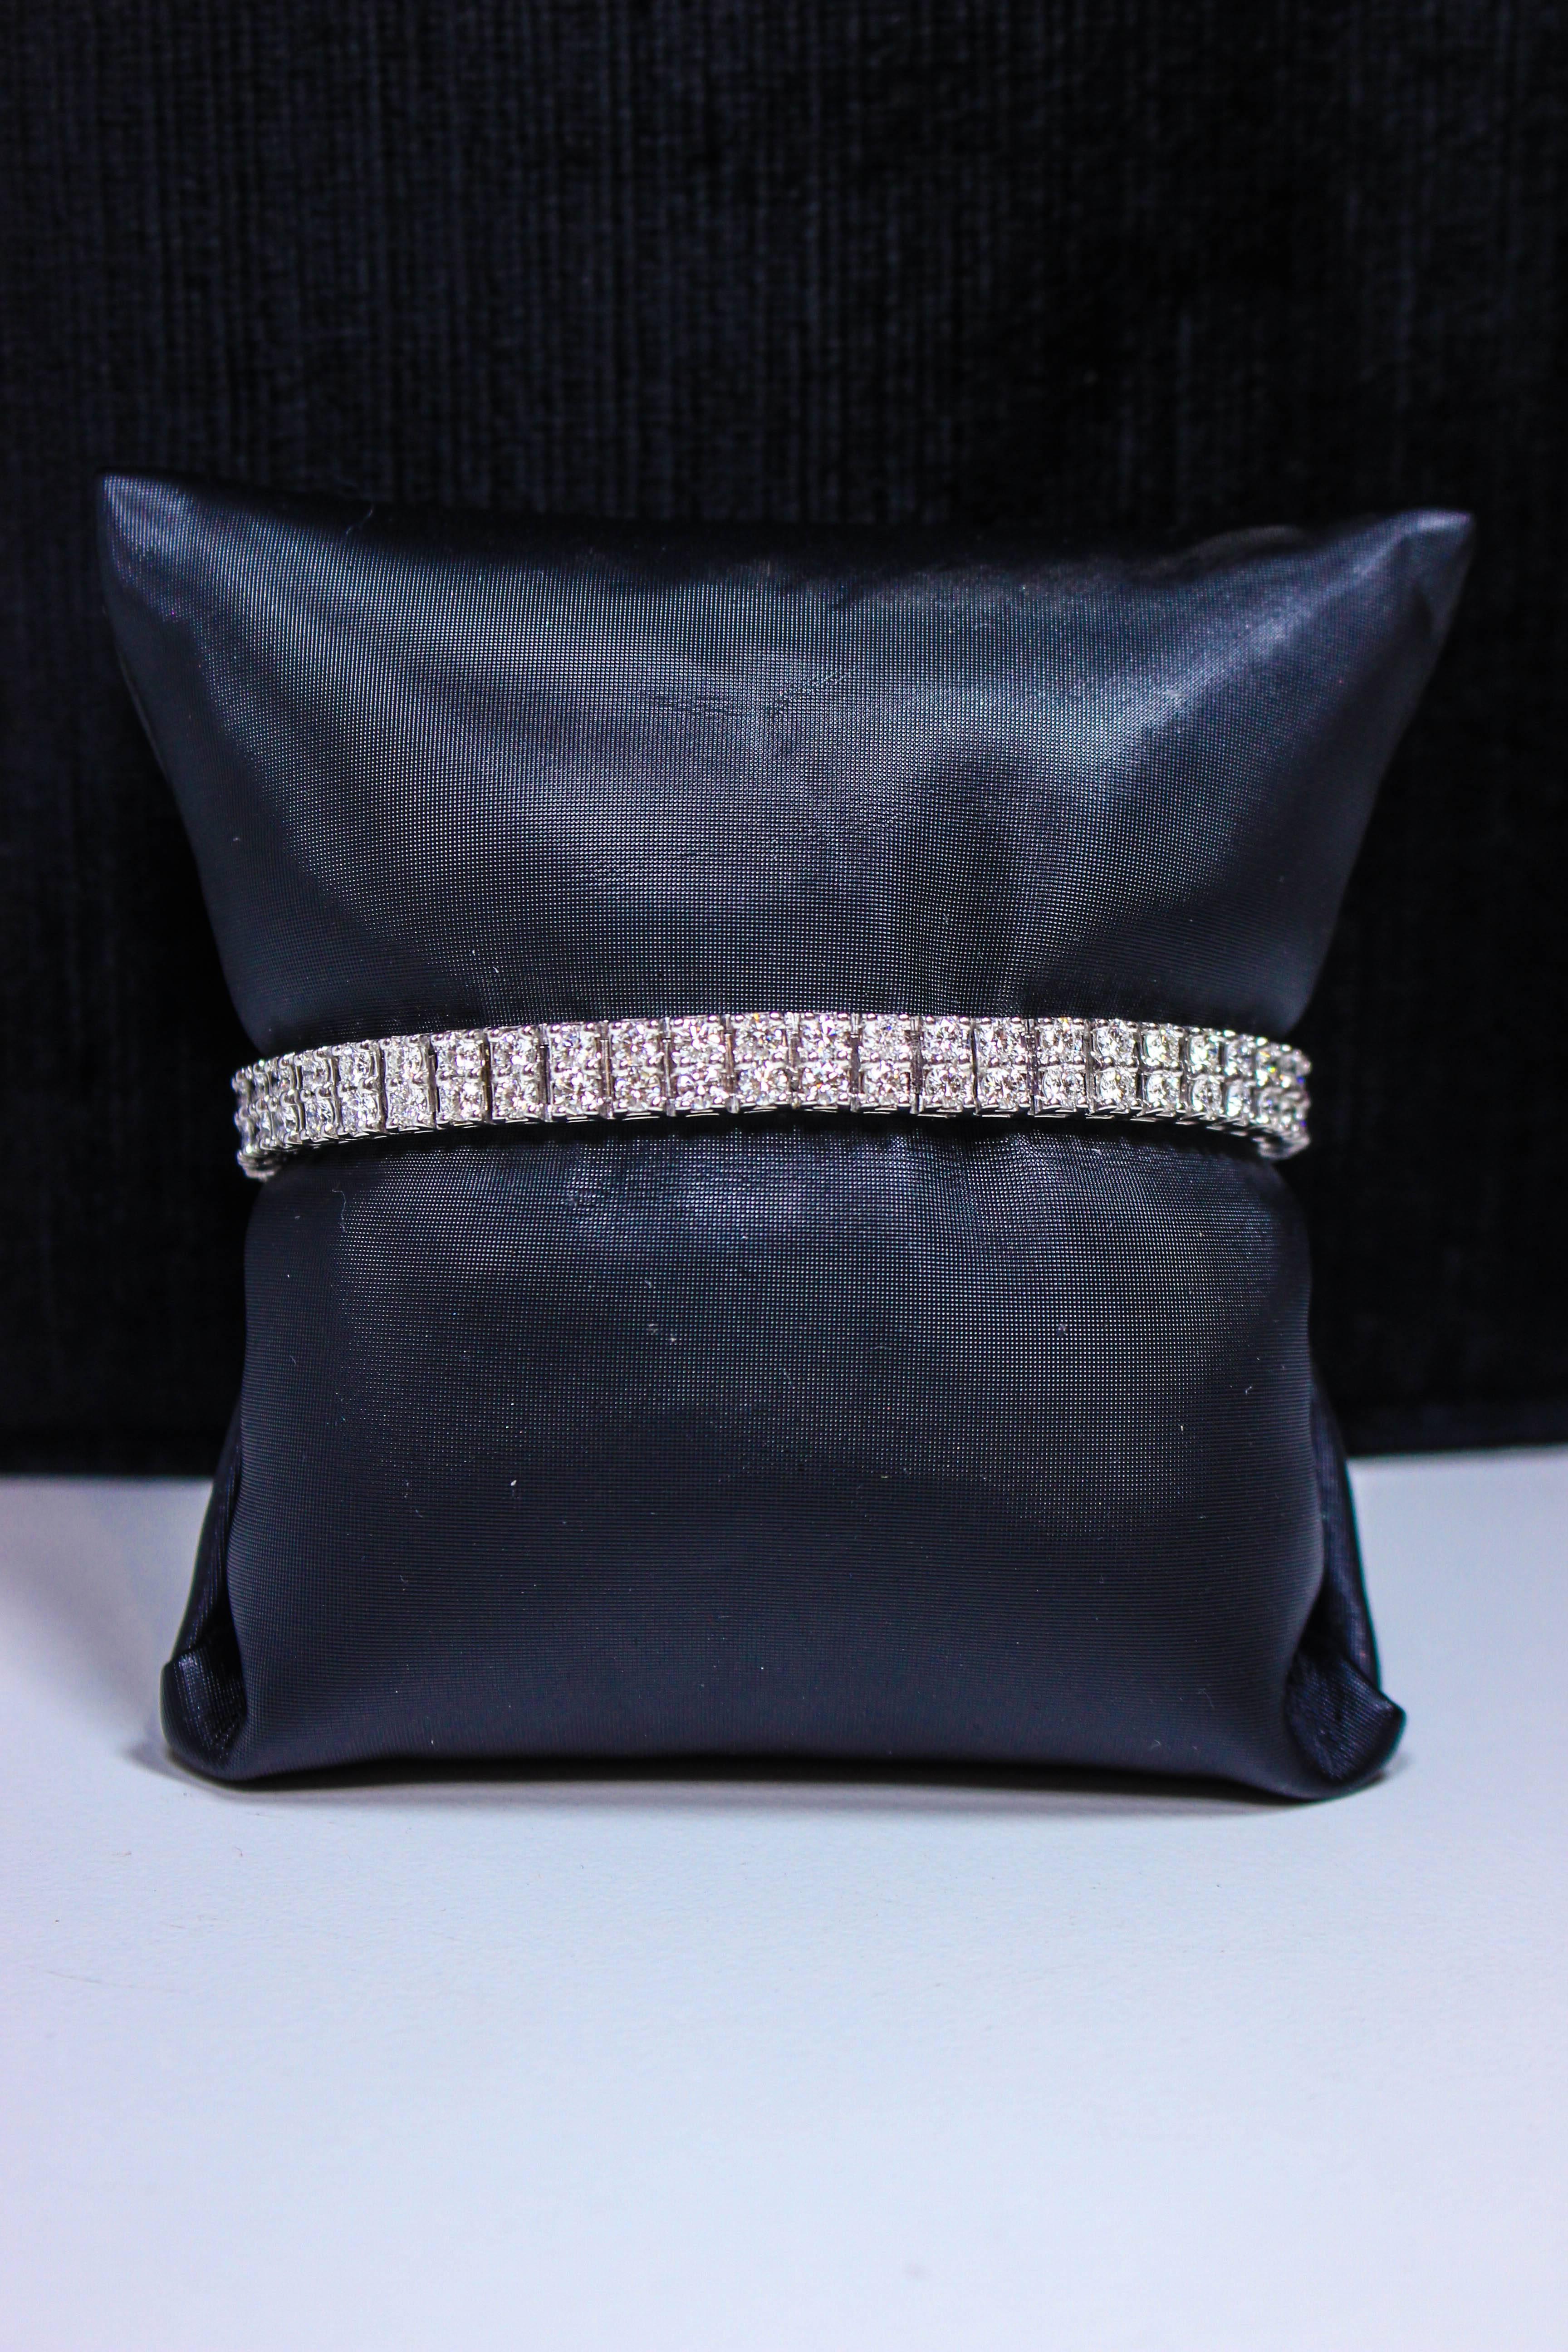 This bracelet is composed of 14kt white gold, features a beautiful double layer style with round cut diamonds and an approximate total weight of 7.84 carats. A wonderful classic style. In excellent condition.

Please feel free to ask any questions